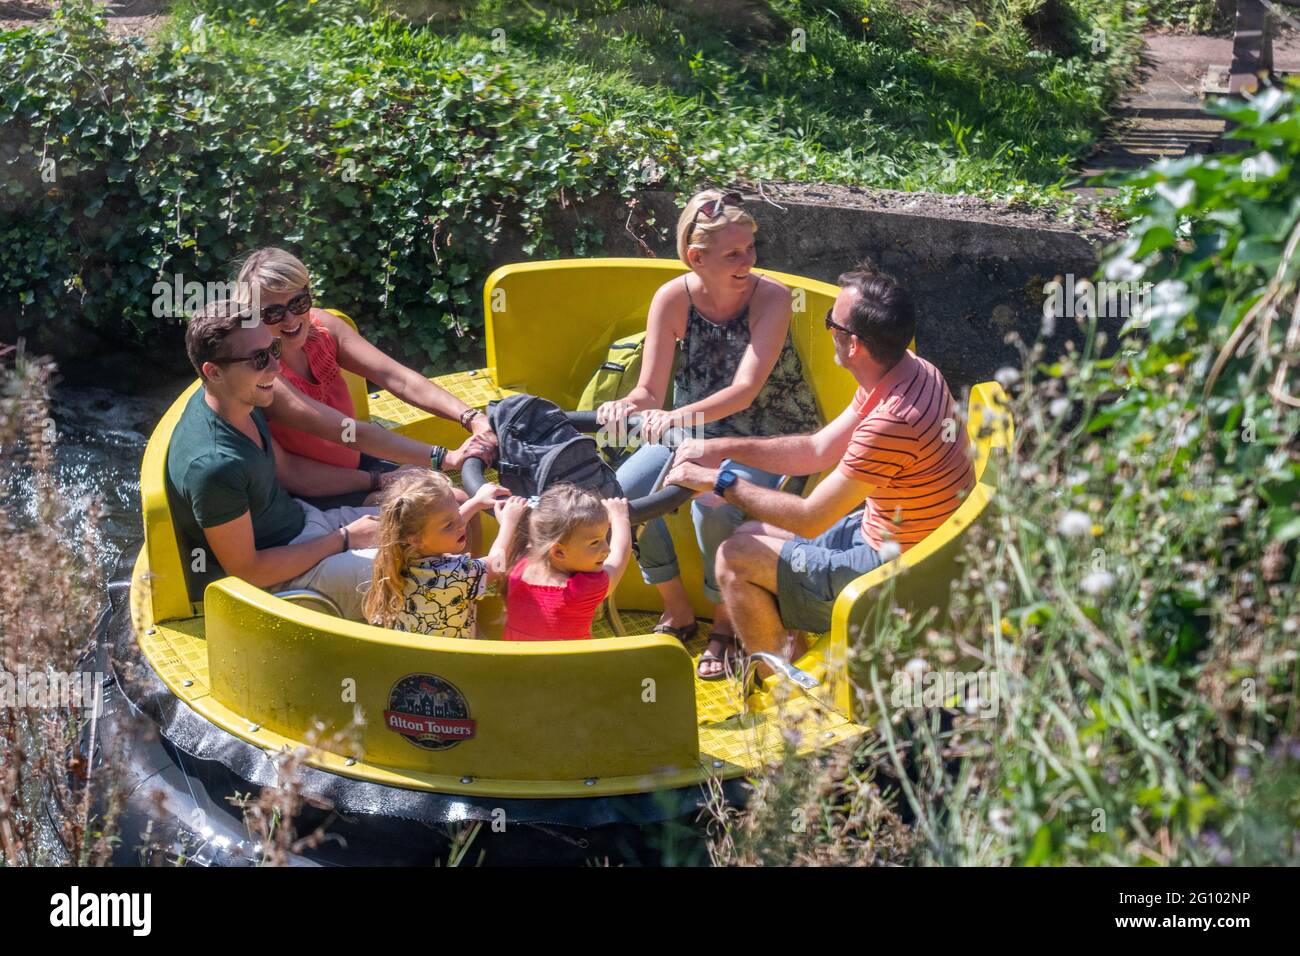 A Family Enjoying cooling down on a red hot day At Alton Towers by riding the Congo River Rapids Ride Together , Making memory's Stock Photo